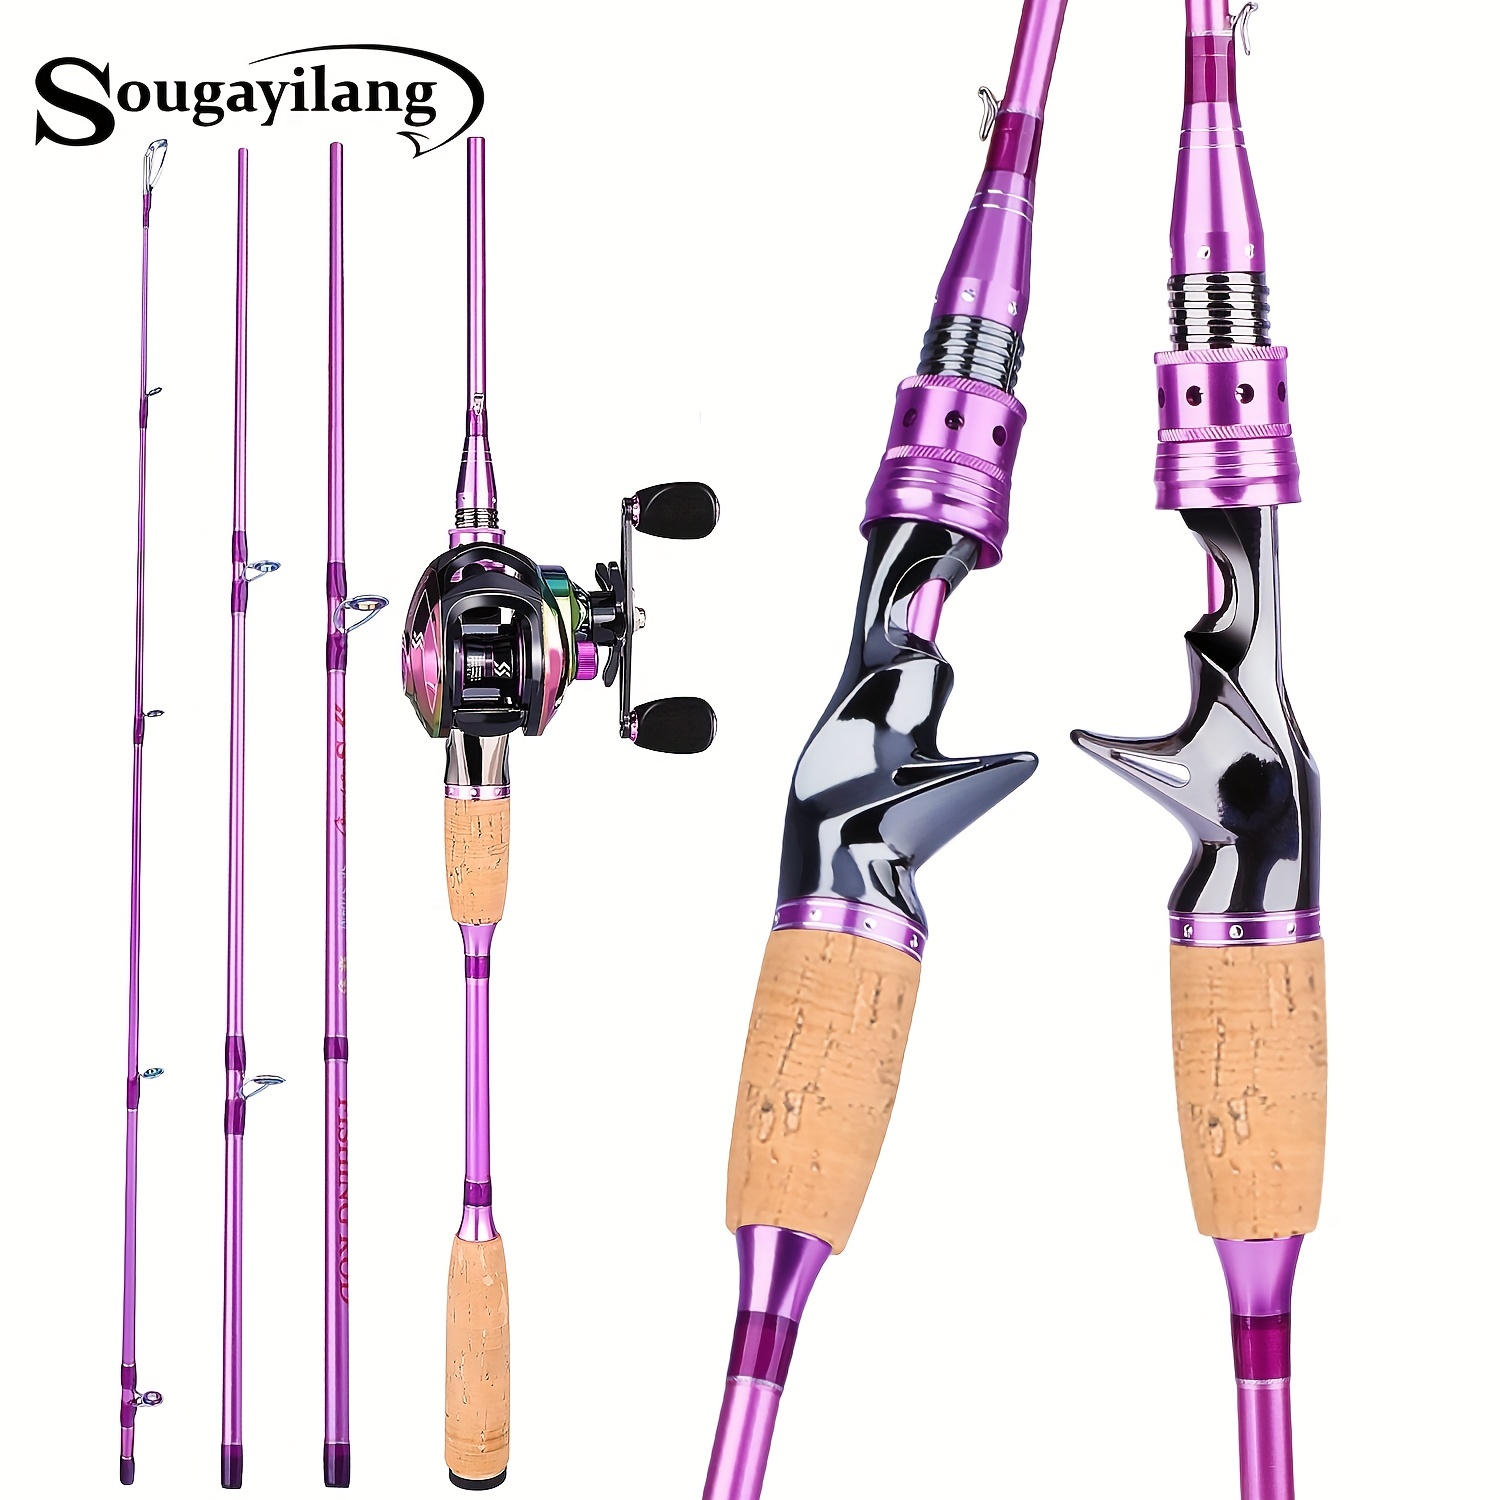 Sougayilang 1 Set Ice Fishing Rod Reel Combo, Including 2 Sections  Lightweight Ice Fishing Rod, 5.2:1 Gear Ratio Fishing Reel With Foldable  Handle